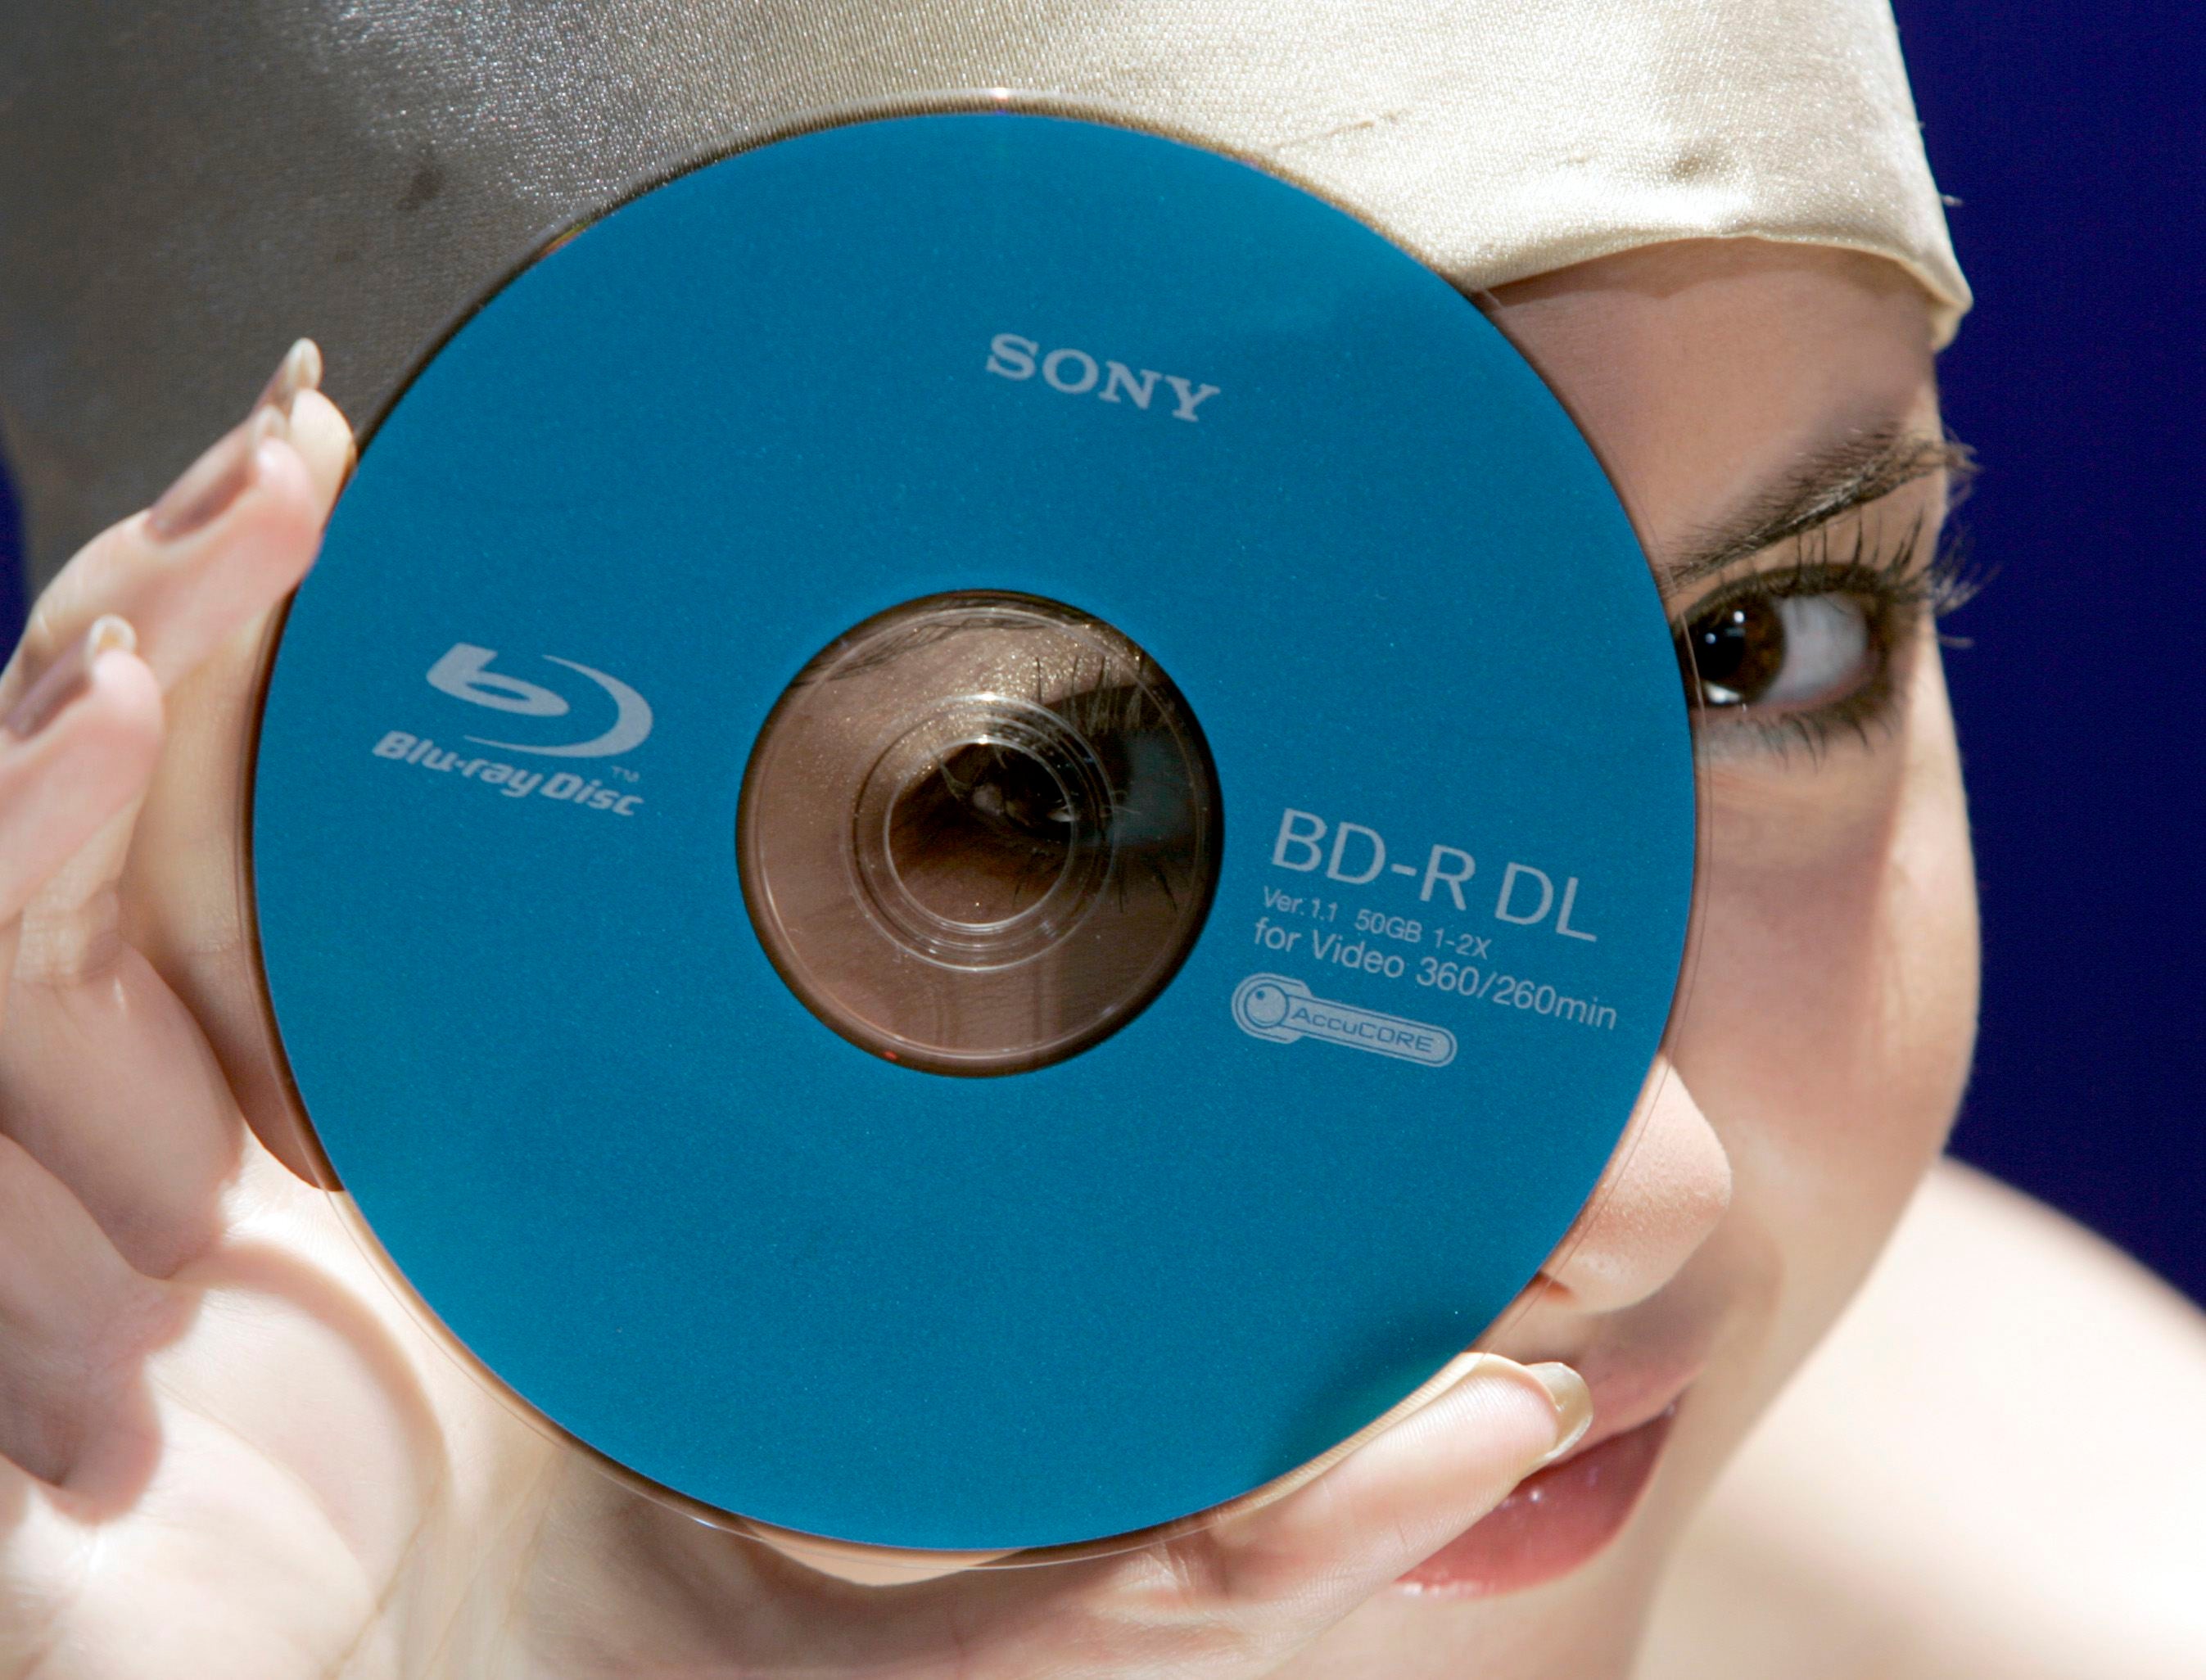 A model displays a Sony Corp's new 50 gigabyte (GB) Blue-ray disk during an unveiling in Tokyo September 12, 2007. Sony said it will launch four models of new Blu-ray high-definition optical disc recorders in November in Japan, as its format battle with t